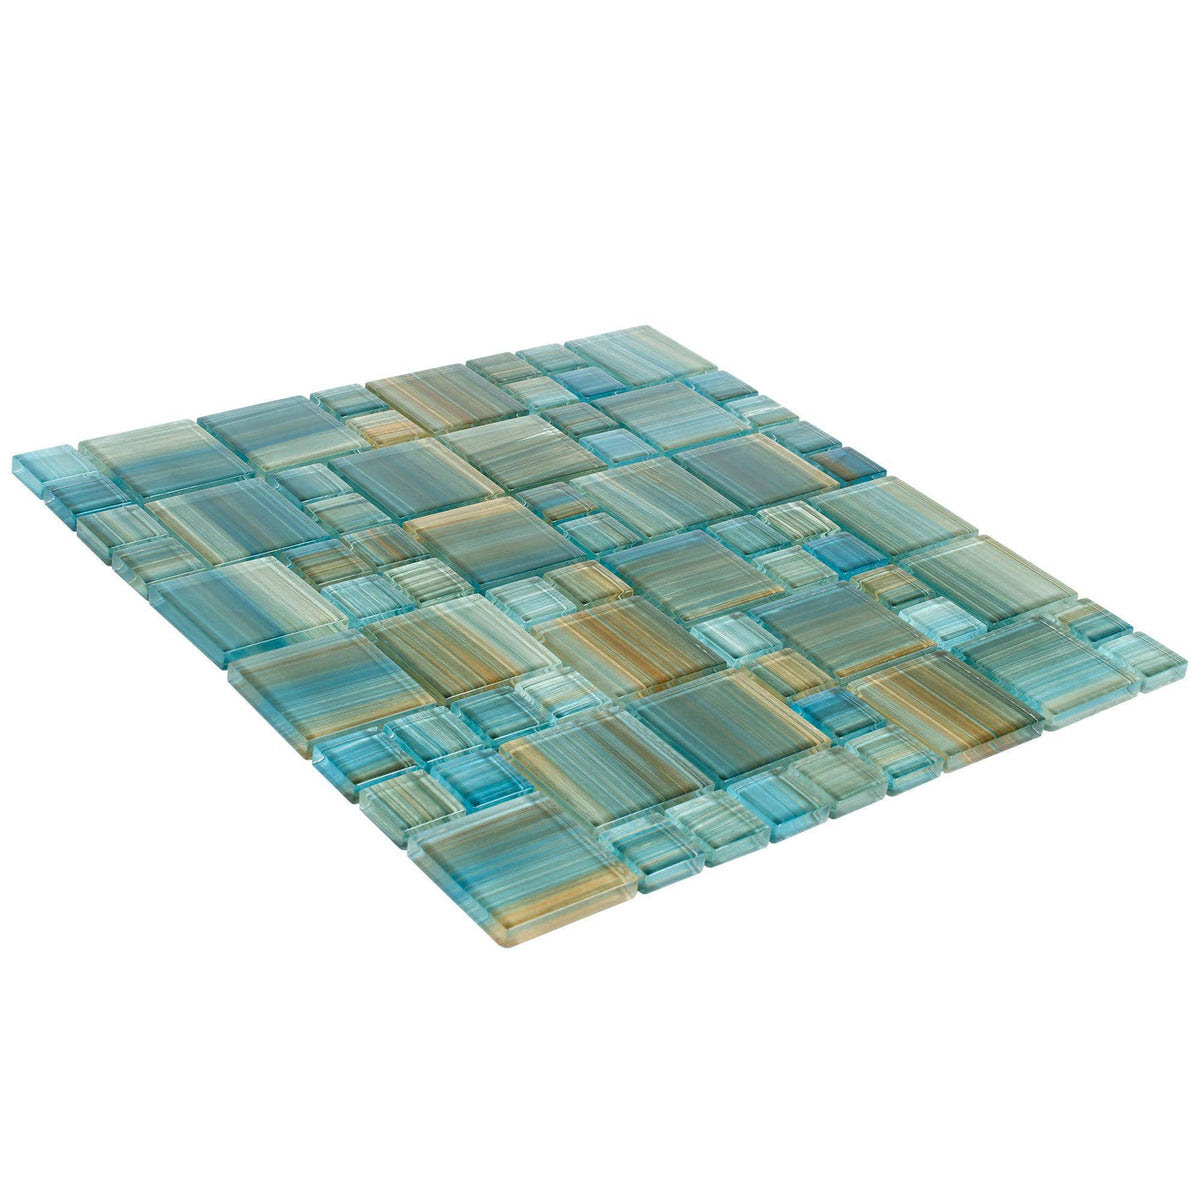 Decorative mosaic wall tiles, packaging type: Modular Brown And Aquamarine Blend Glass Mosaic Tile Mto0091